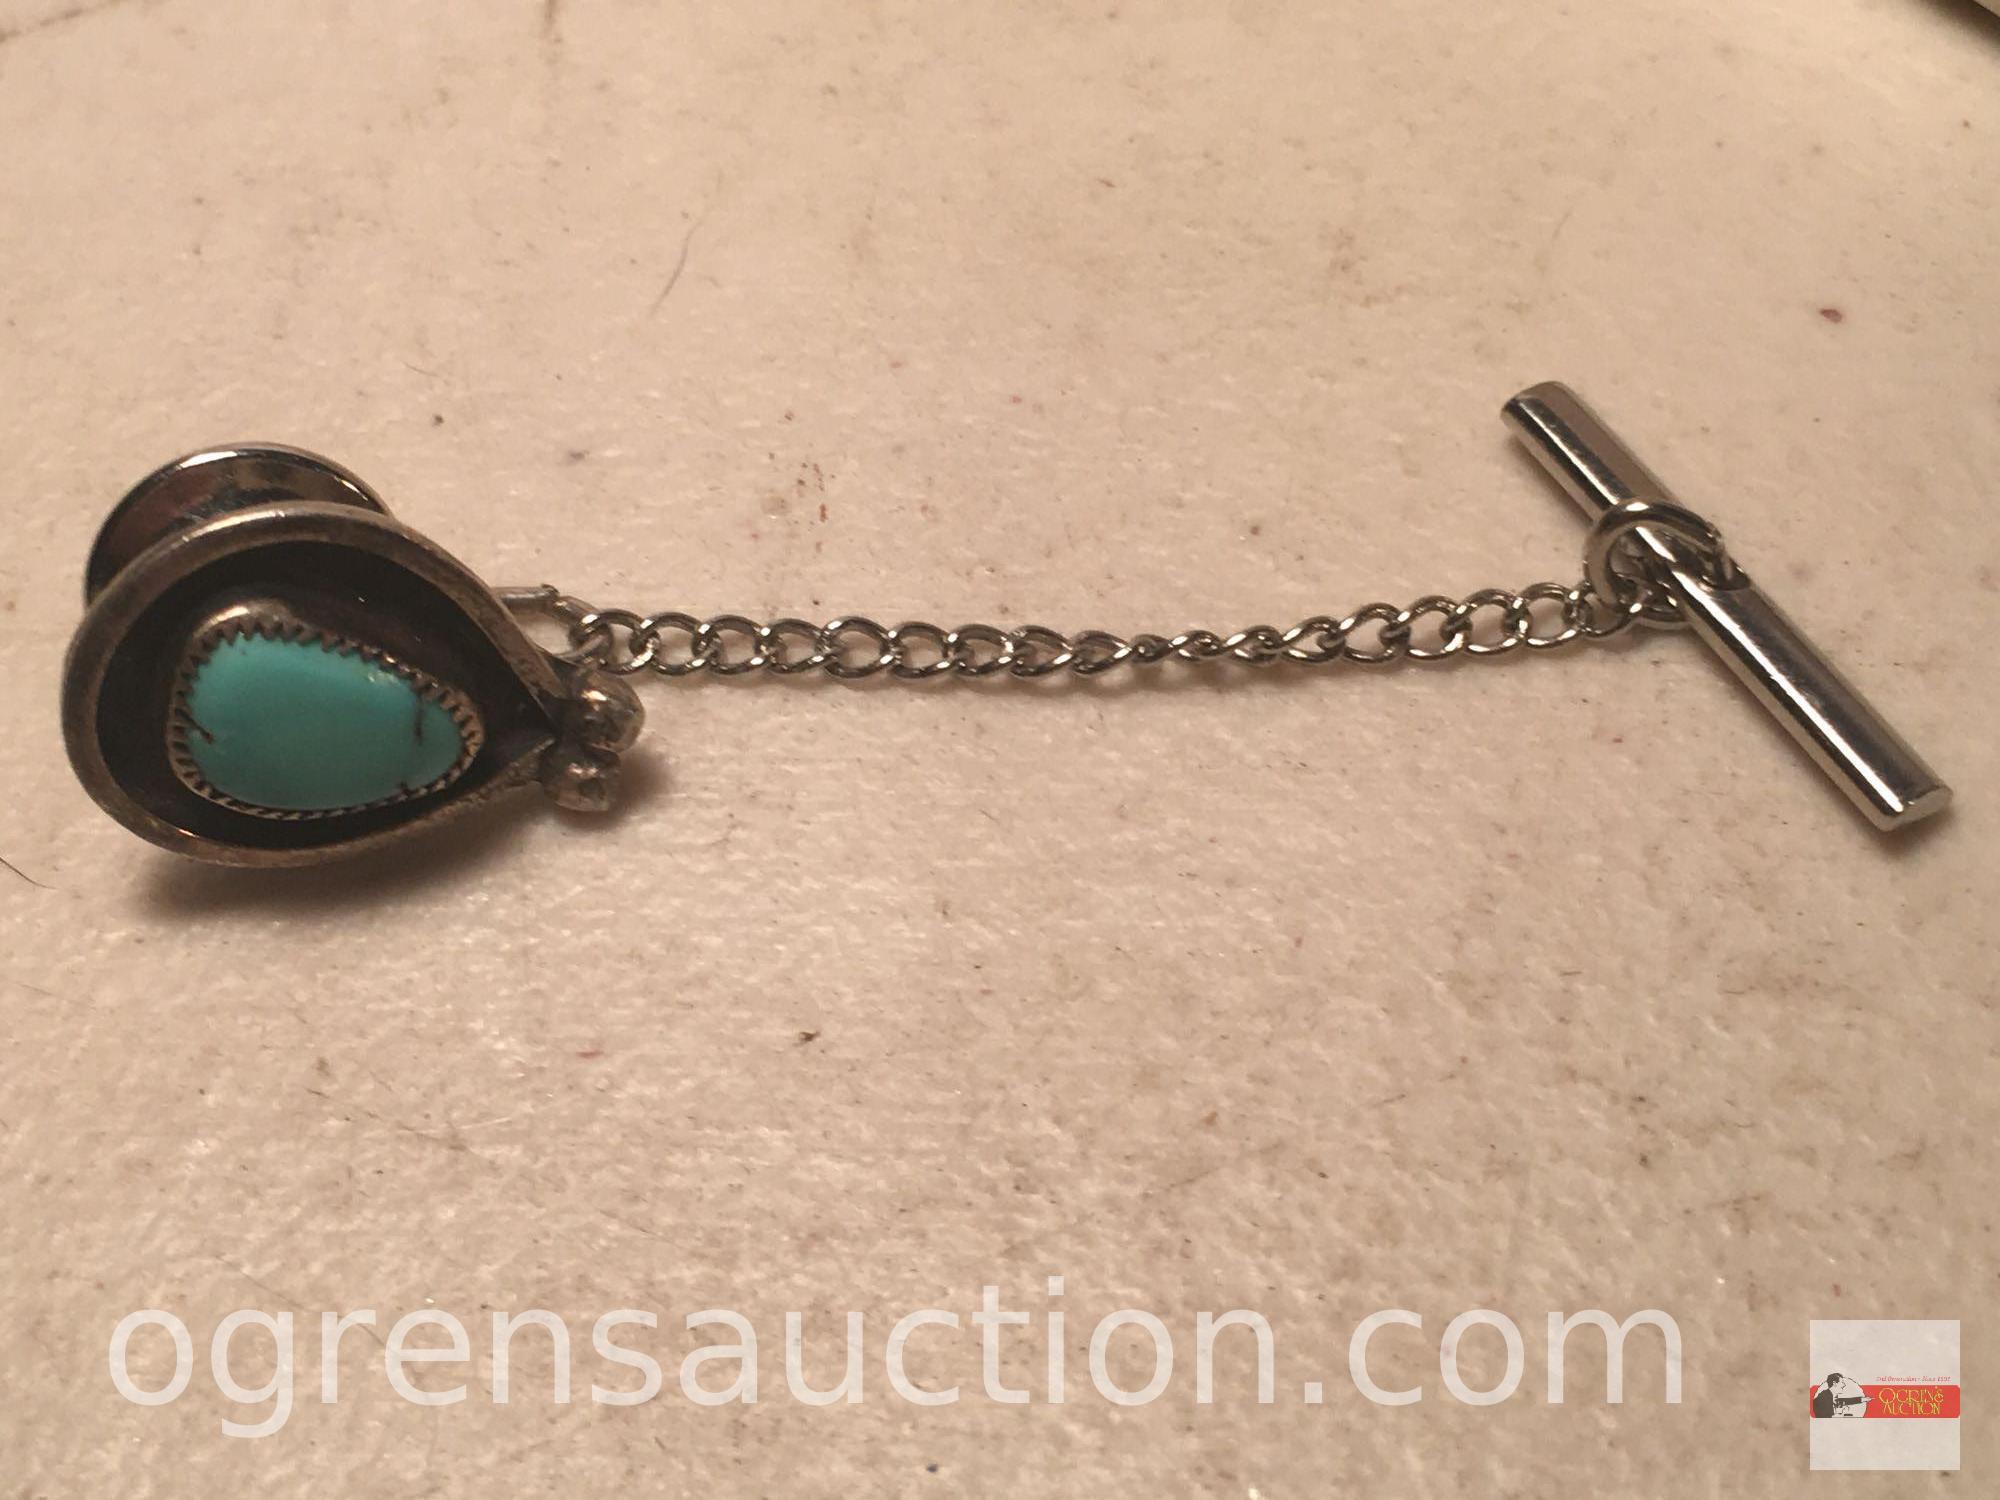 Jewelry - 2 sterling tie tacks, 1 with turquoise stone